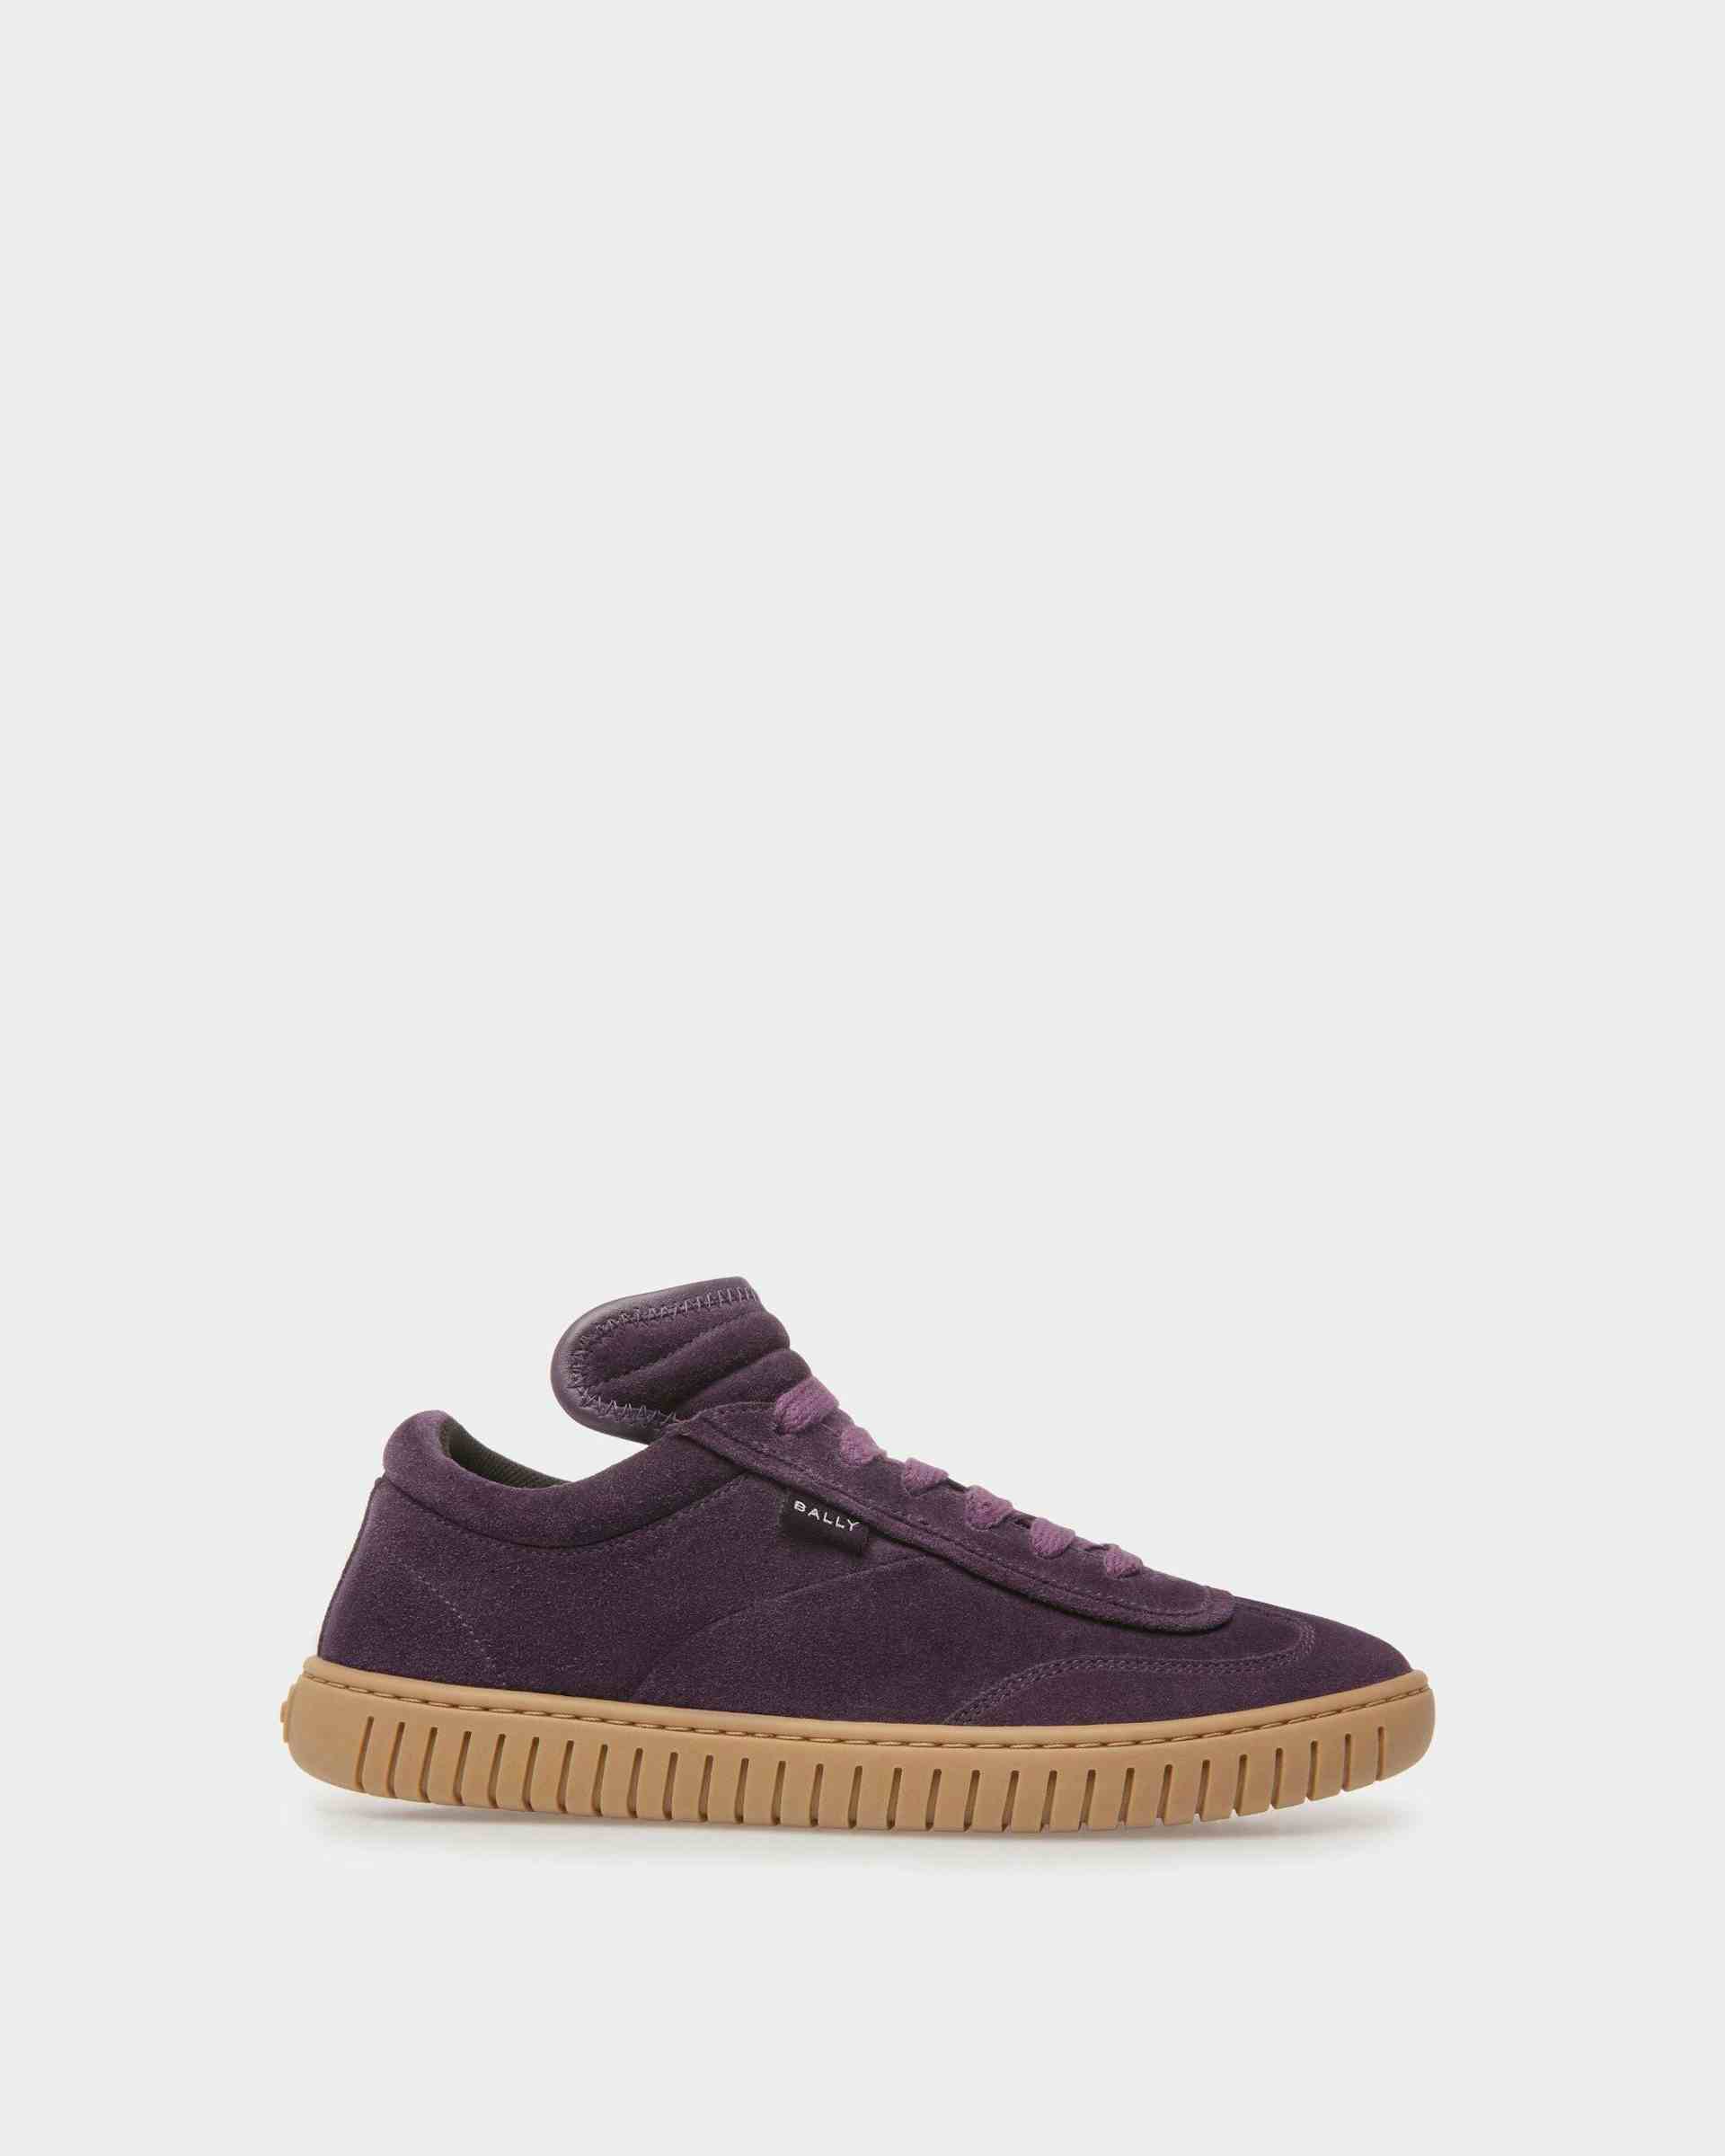 Player Sneakers In Orchid And Amber Leather - Women's - Bally